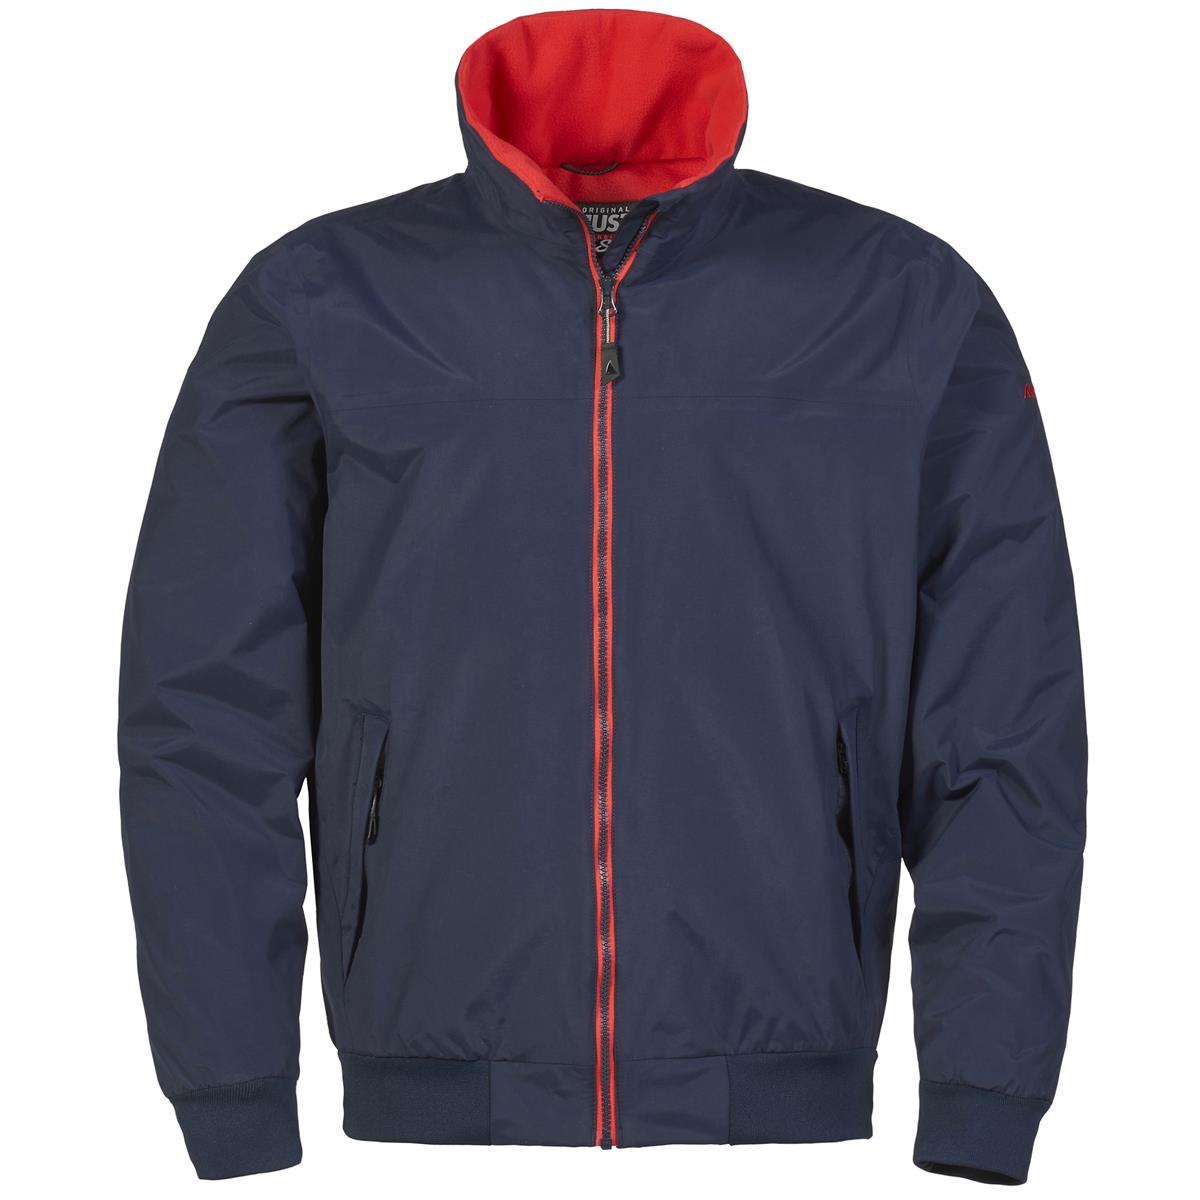 What are the features of the Musto Snug Blouson 2.0 jacket?